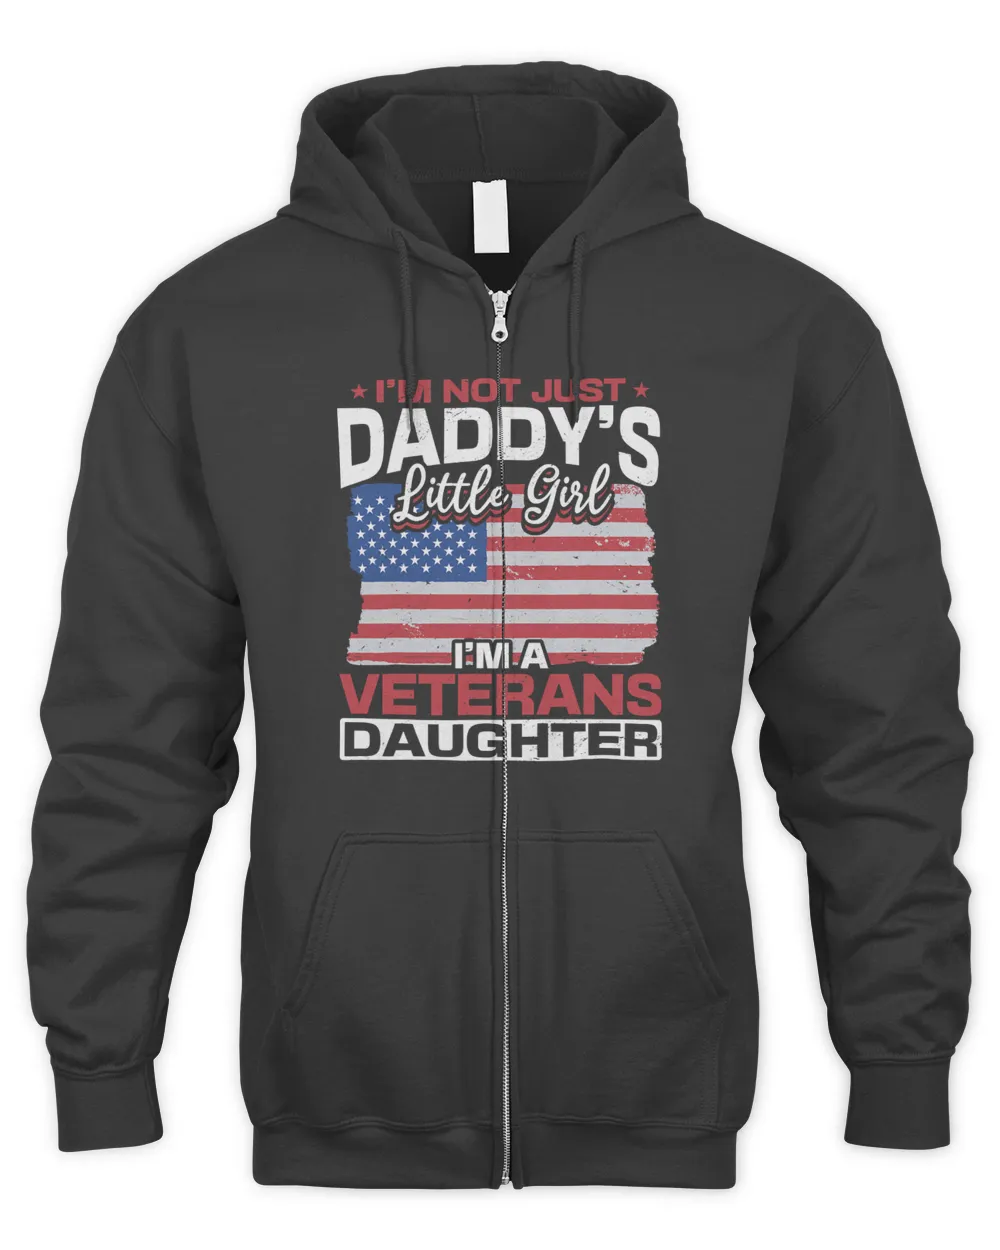 US I´m not just daddys little girl i´m a Veterans daughter 158